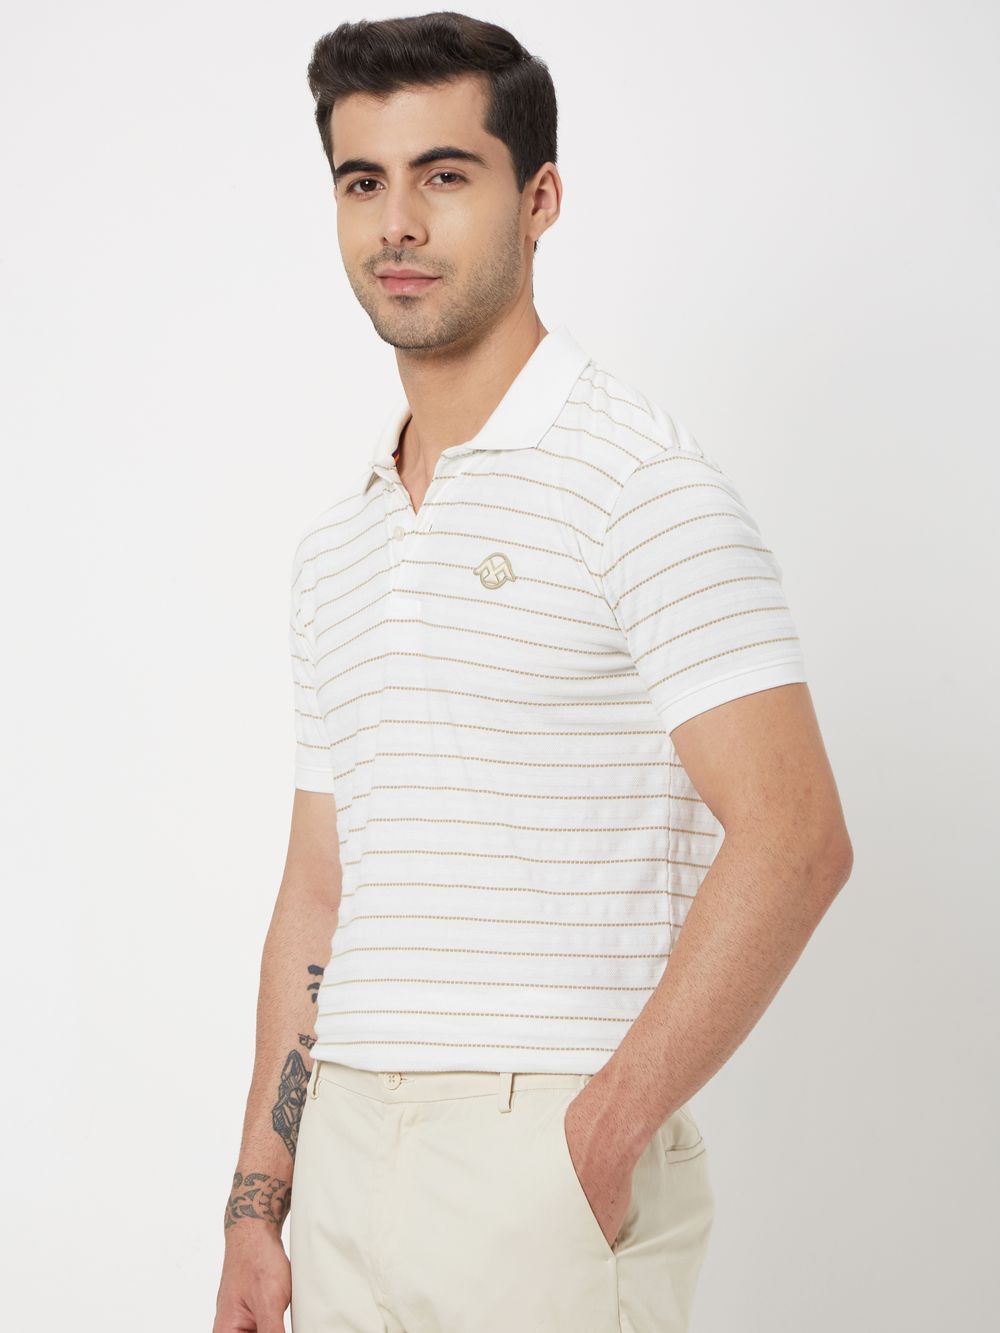 Off White & Beige Striped Jersey Polo T-Shirt